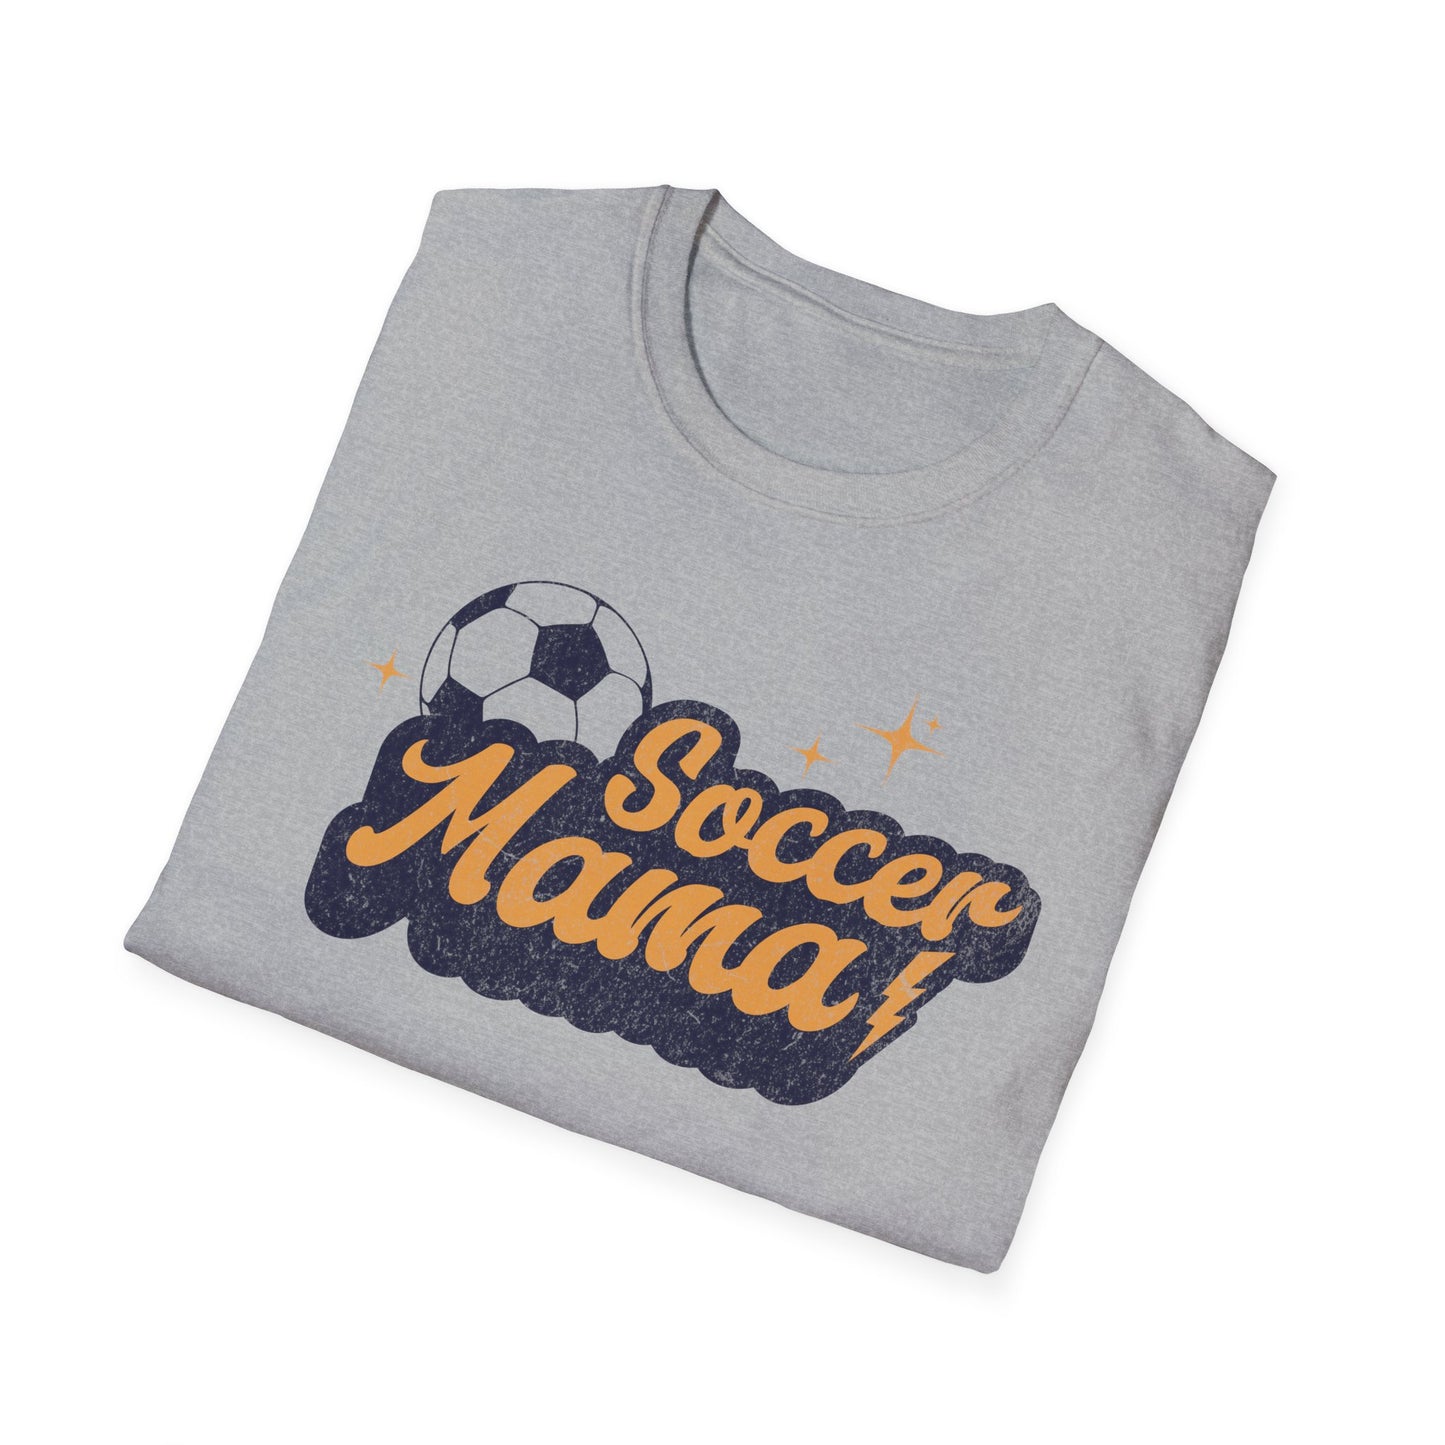 Soccer Mama (softstyle T)